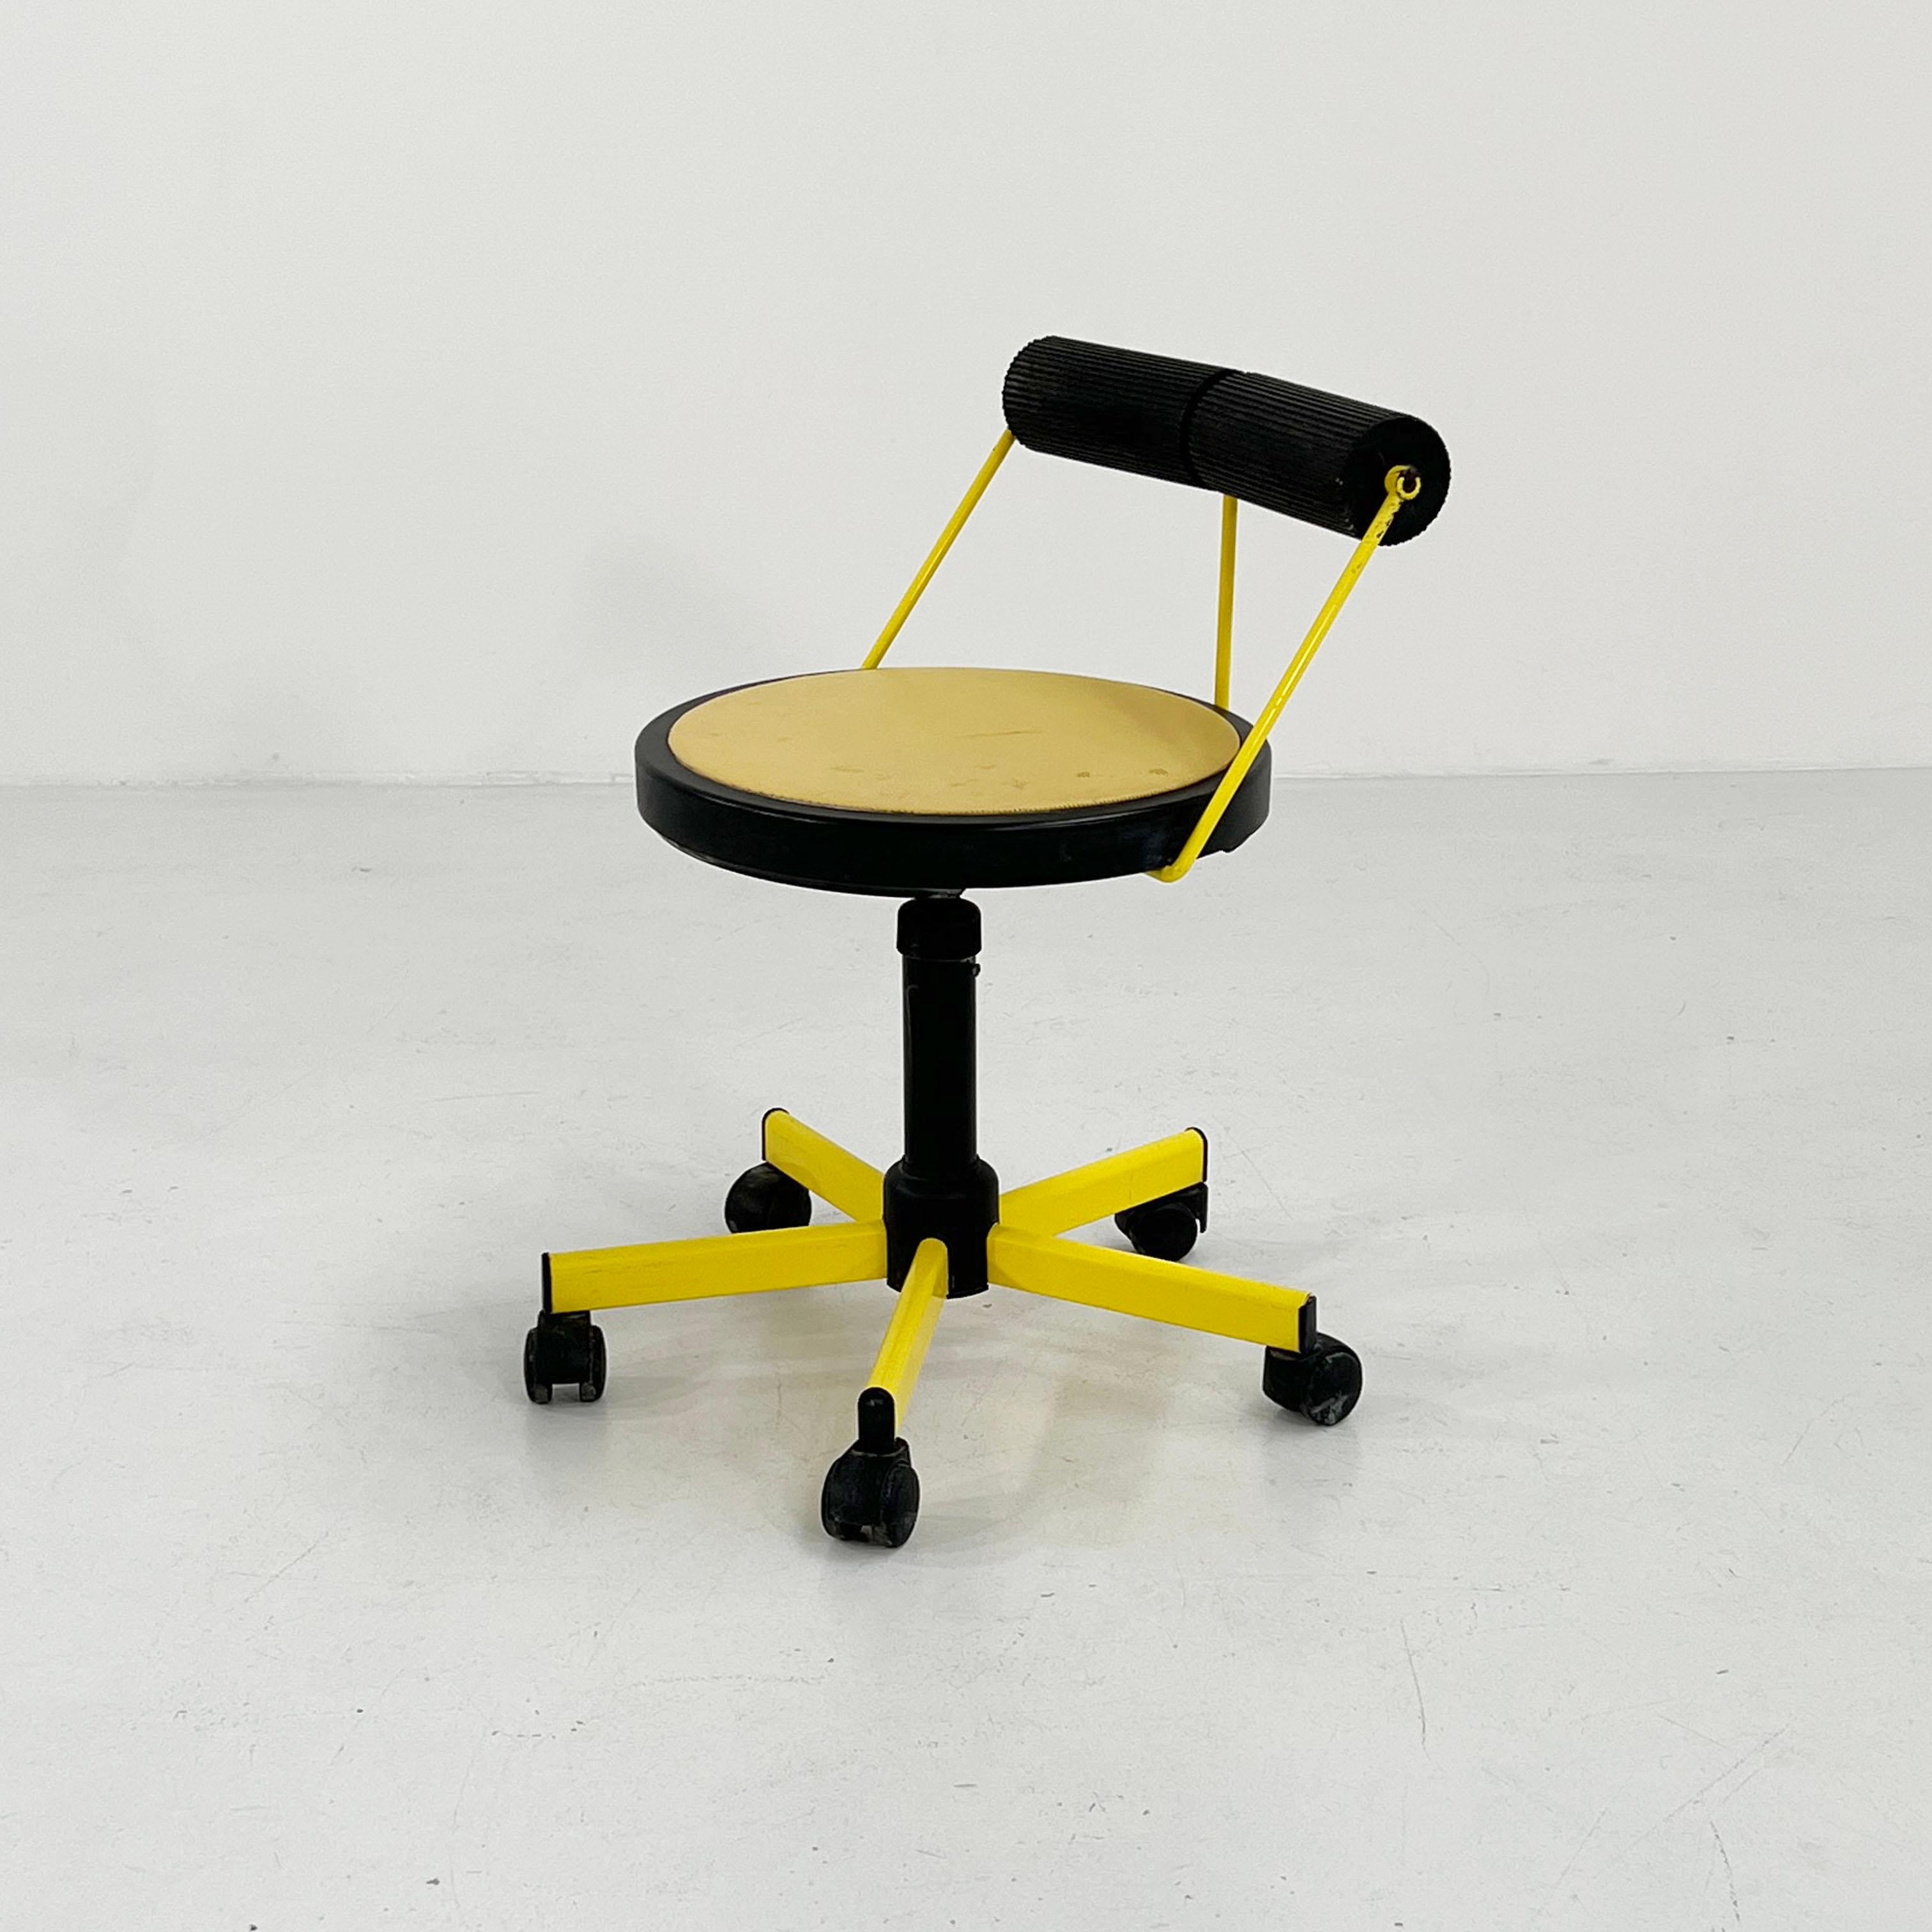 Late 20th Century Adjustable Yellow Desk Chair from Bieffeplast, 1980s